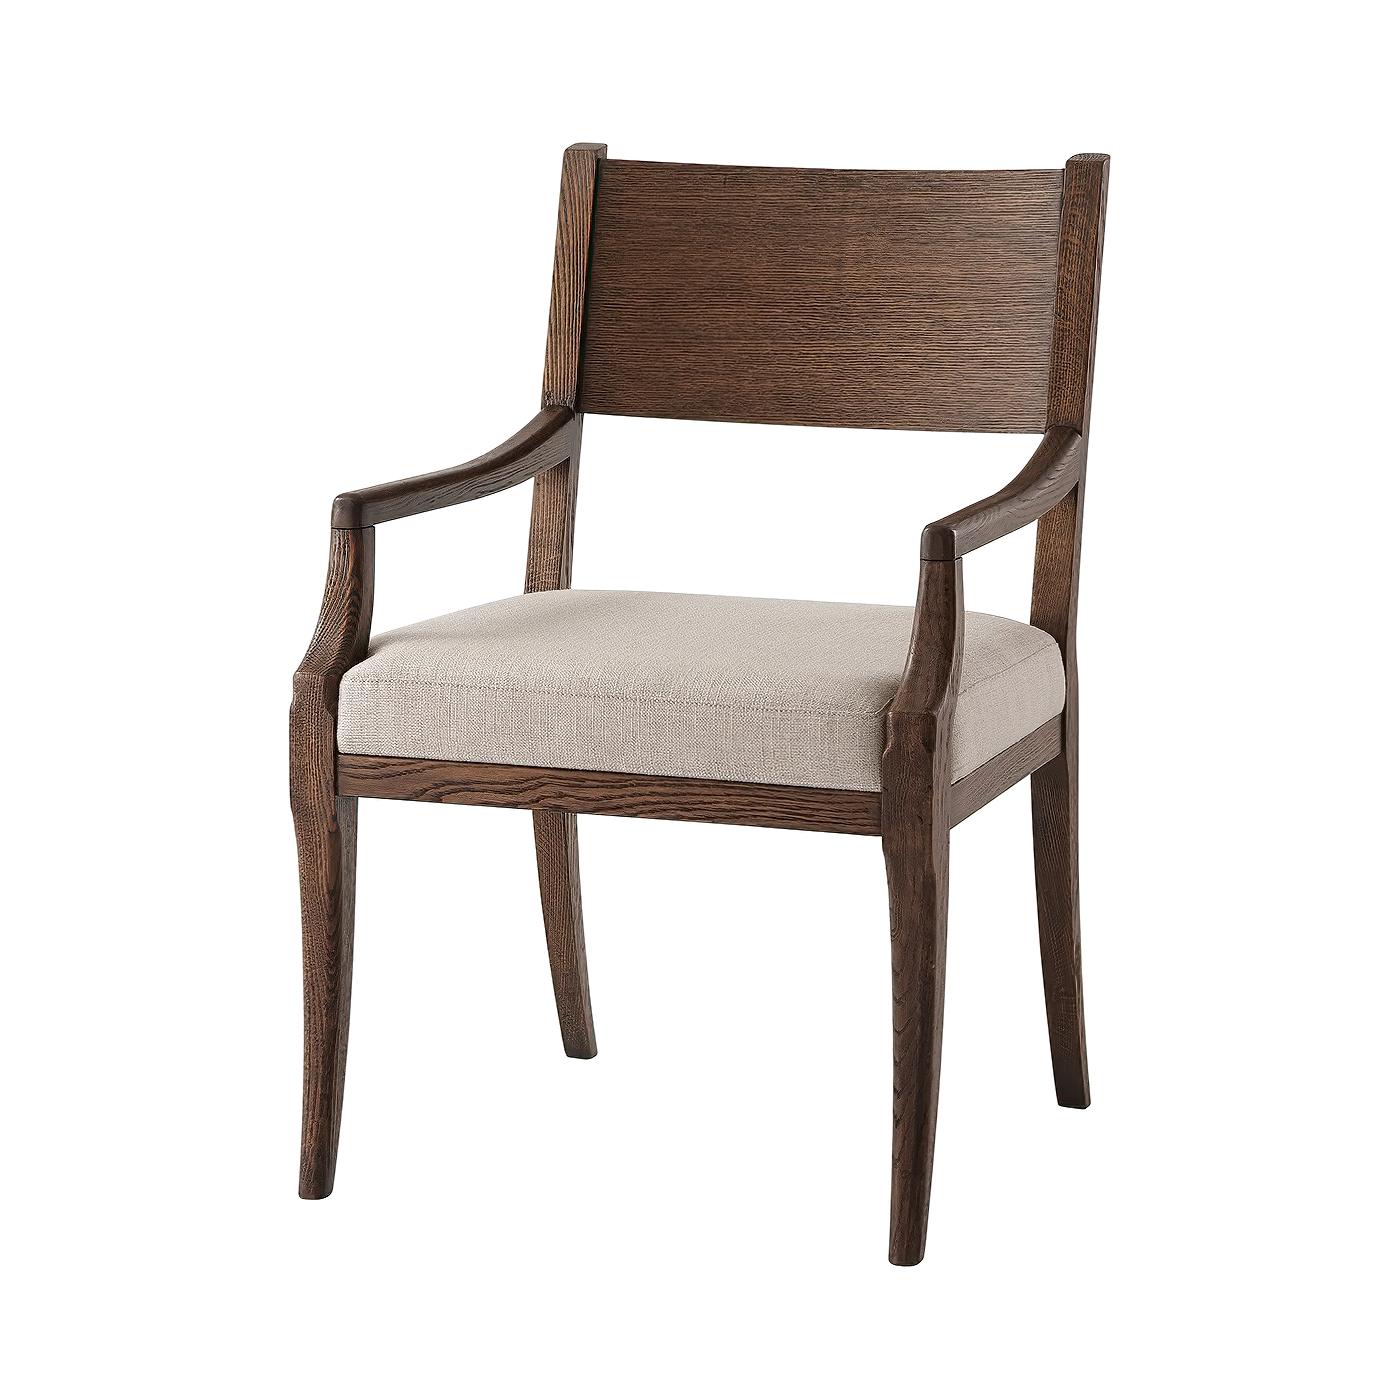 A modern classically inspired dining chair with a carved bar backrest, with a boxed and upholstered cushion seat on sabre legs with our brushed oak Charteris finish.

Armchair dimensions: 24